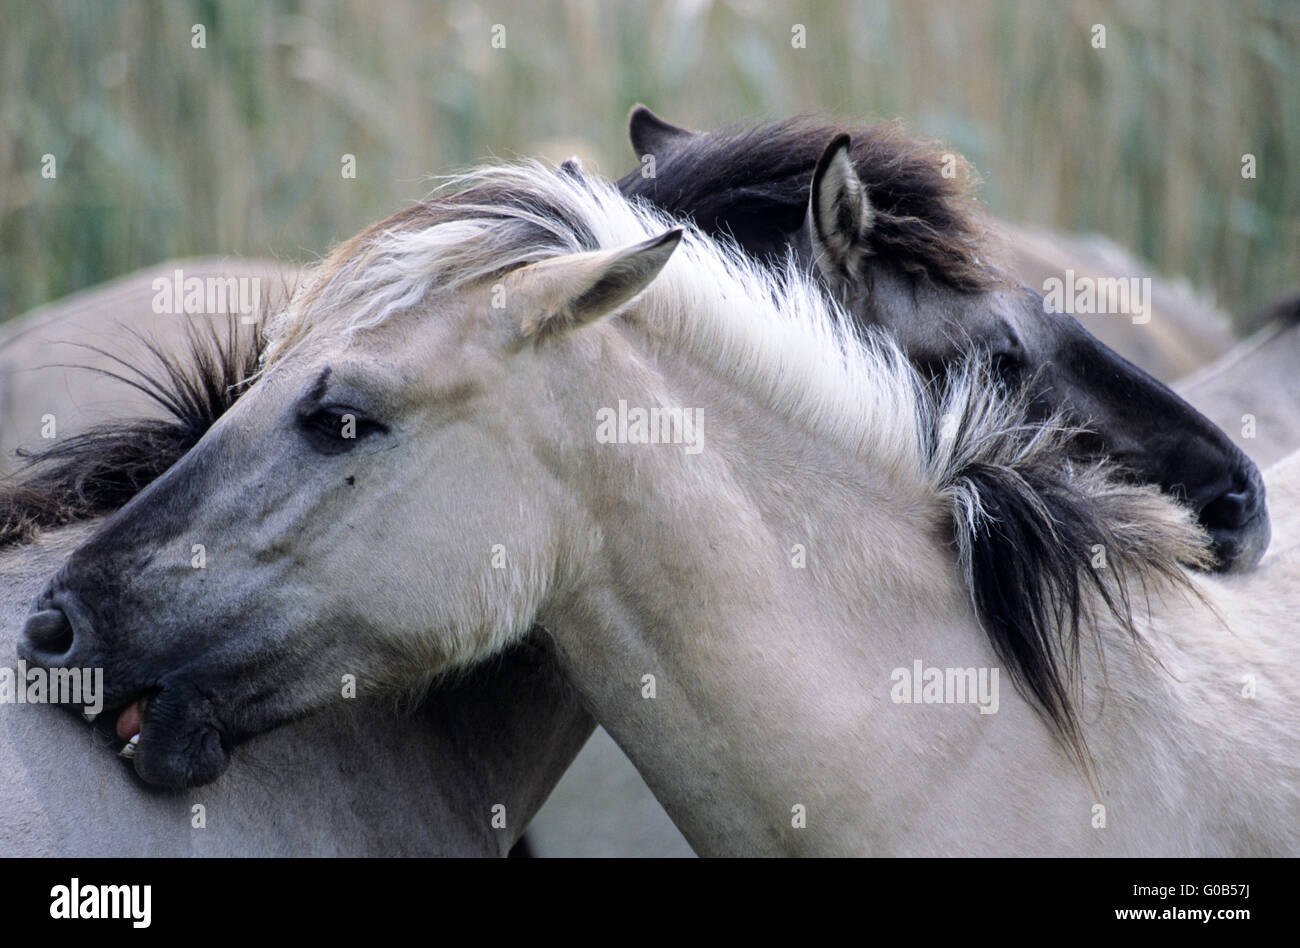 Heck Horse stallions grooming each other Stock Photo